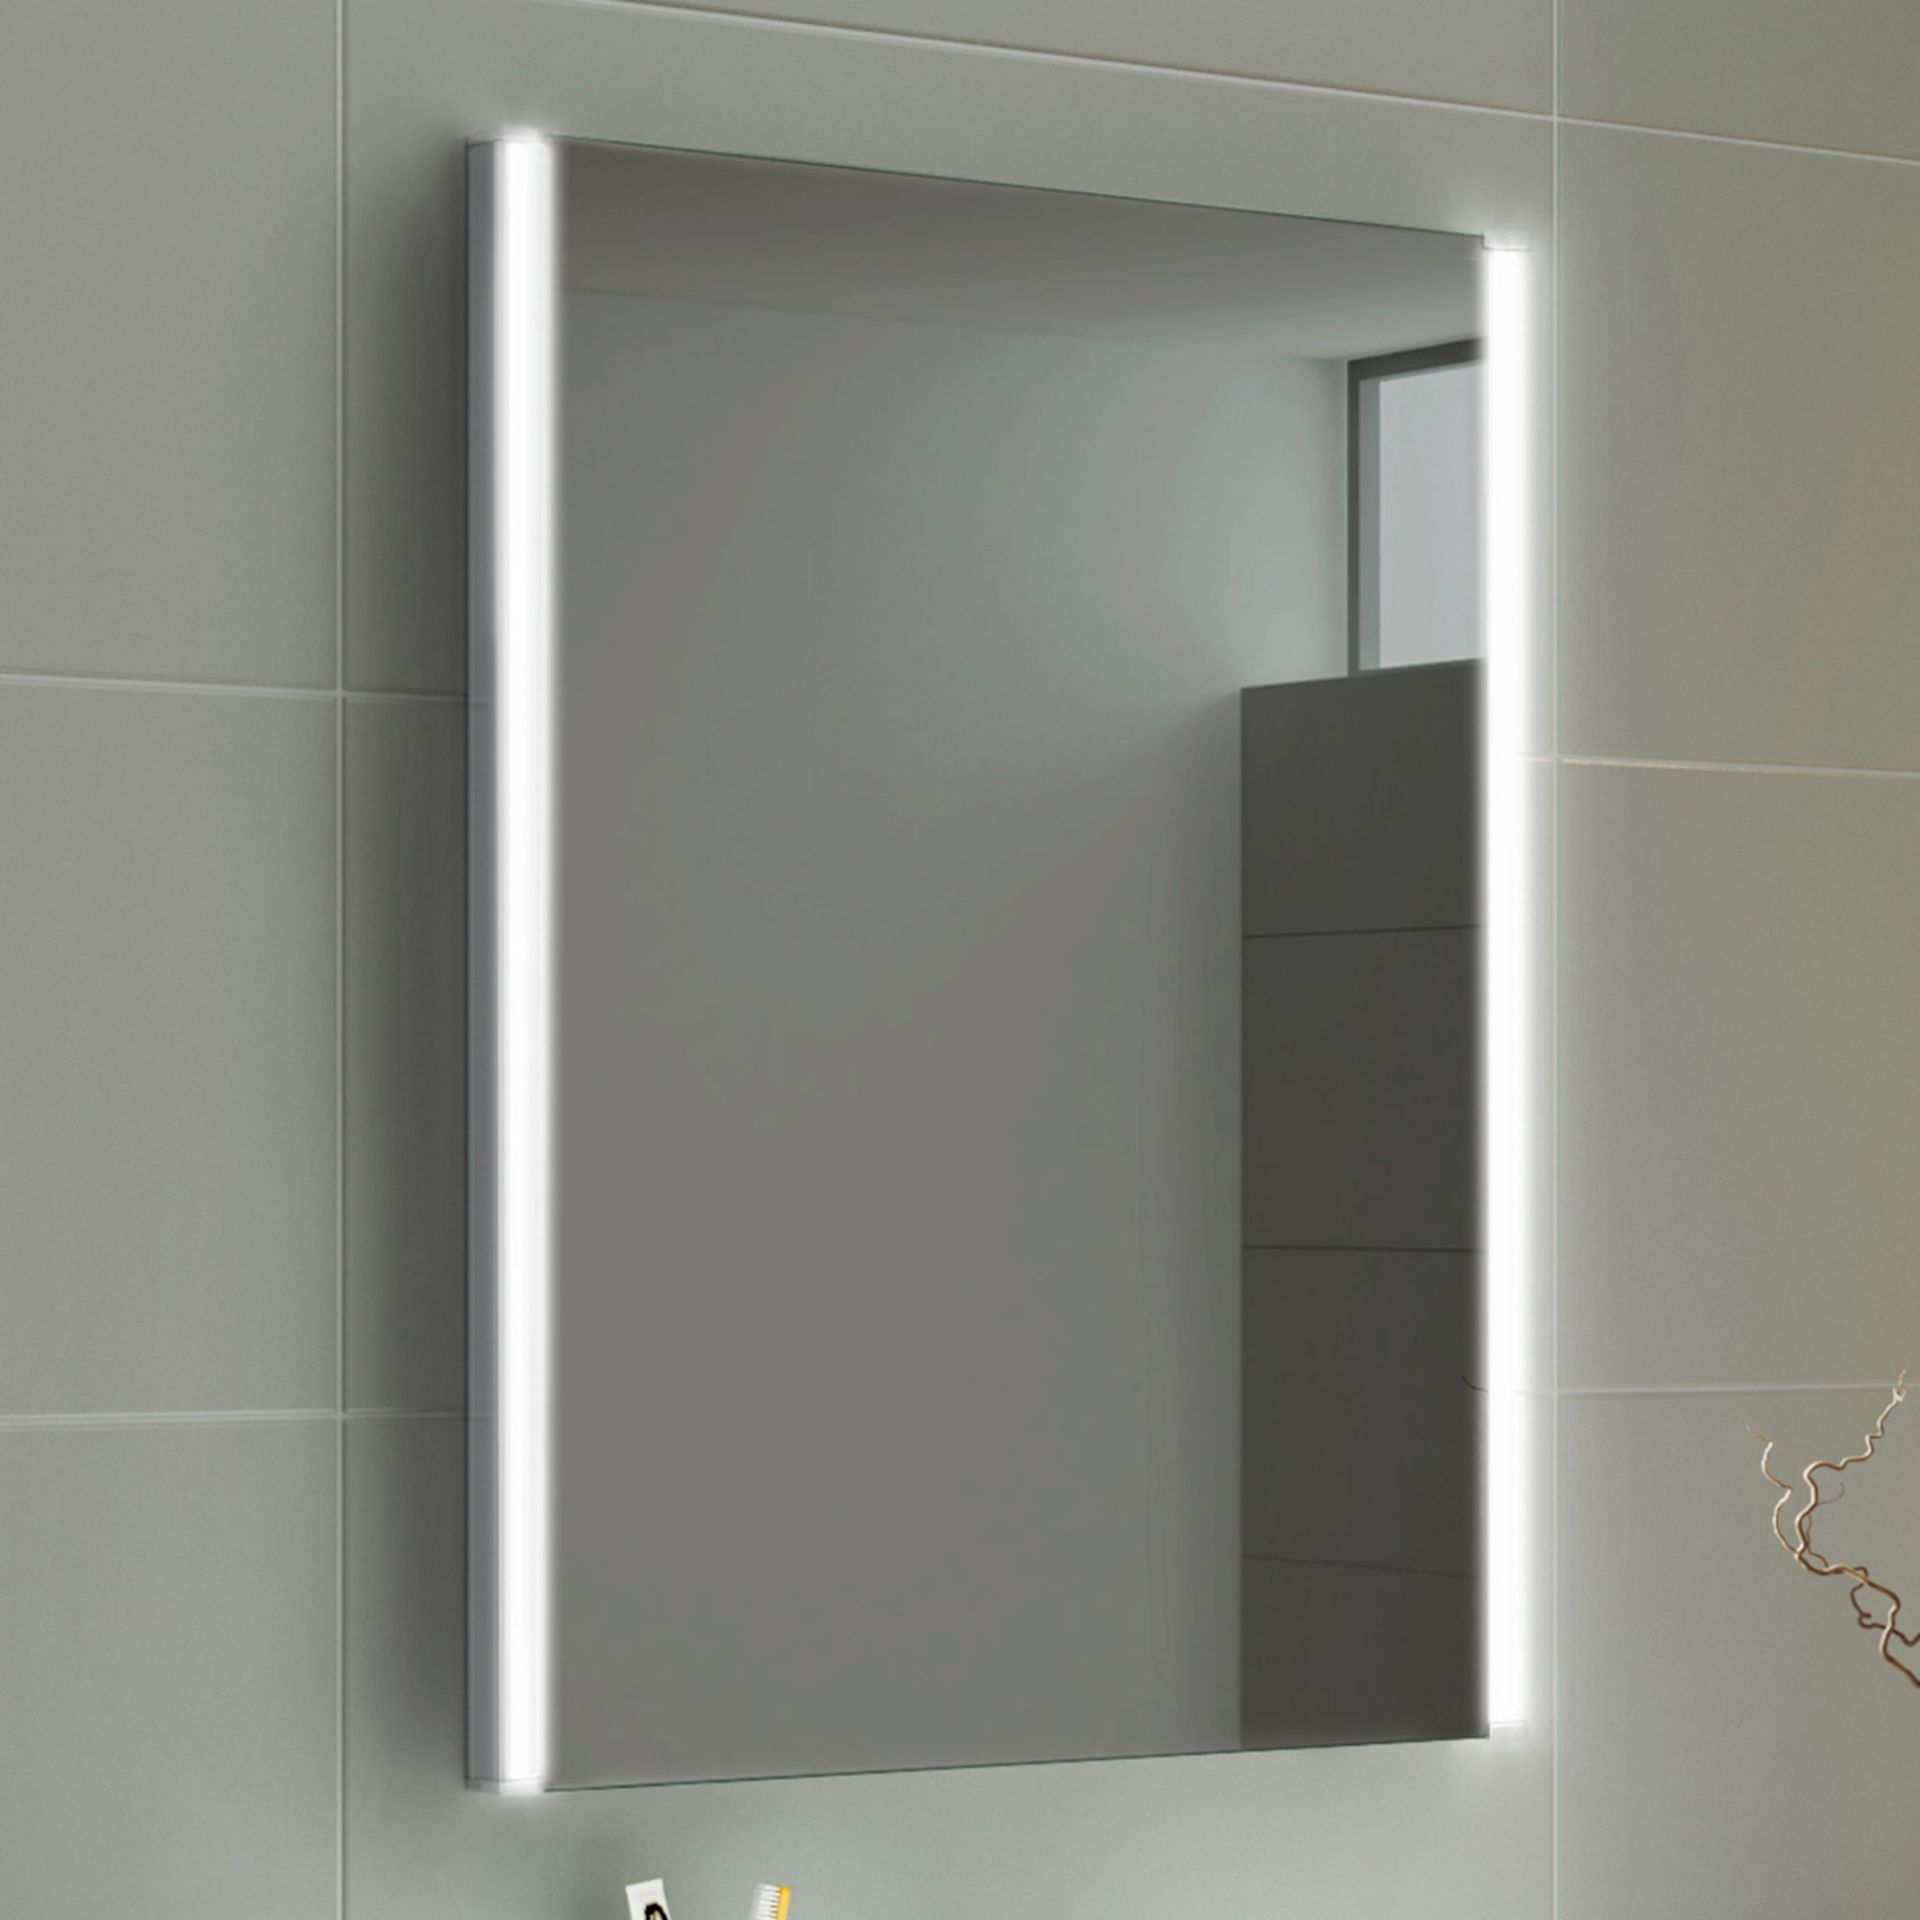 (PT140) 500x700mm Denver Illuminated LED Mirror - Battery Operated. Energy saving controlled On /